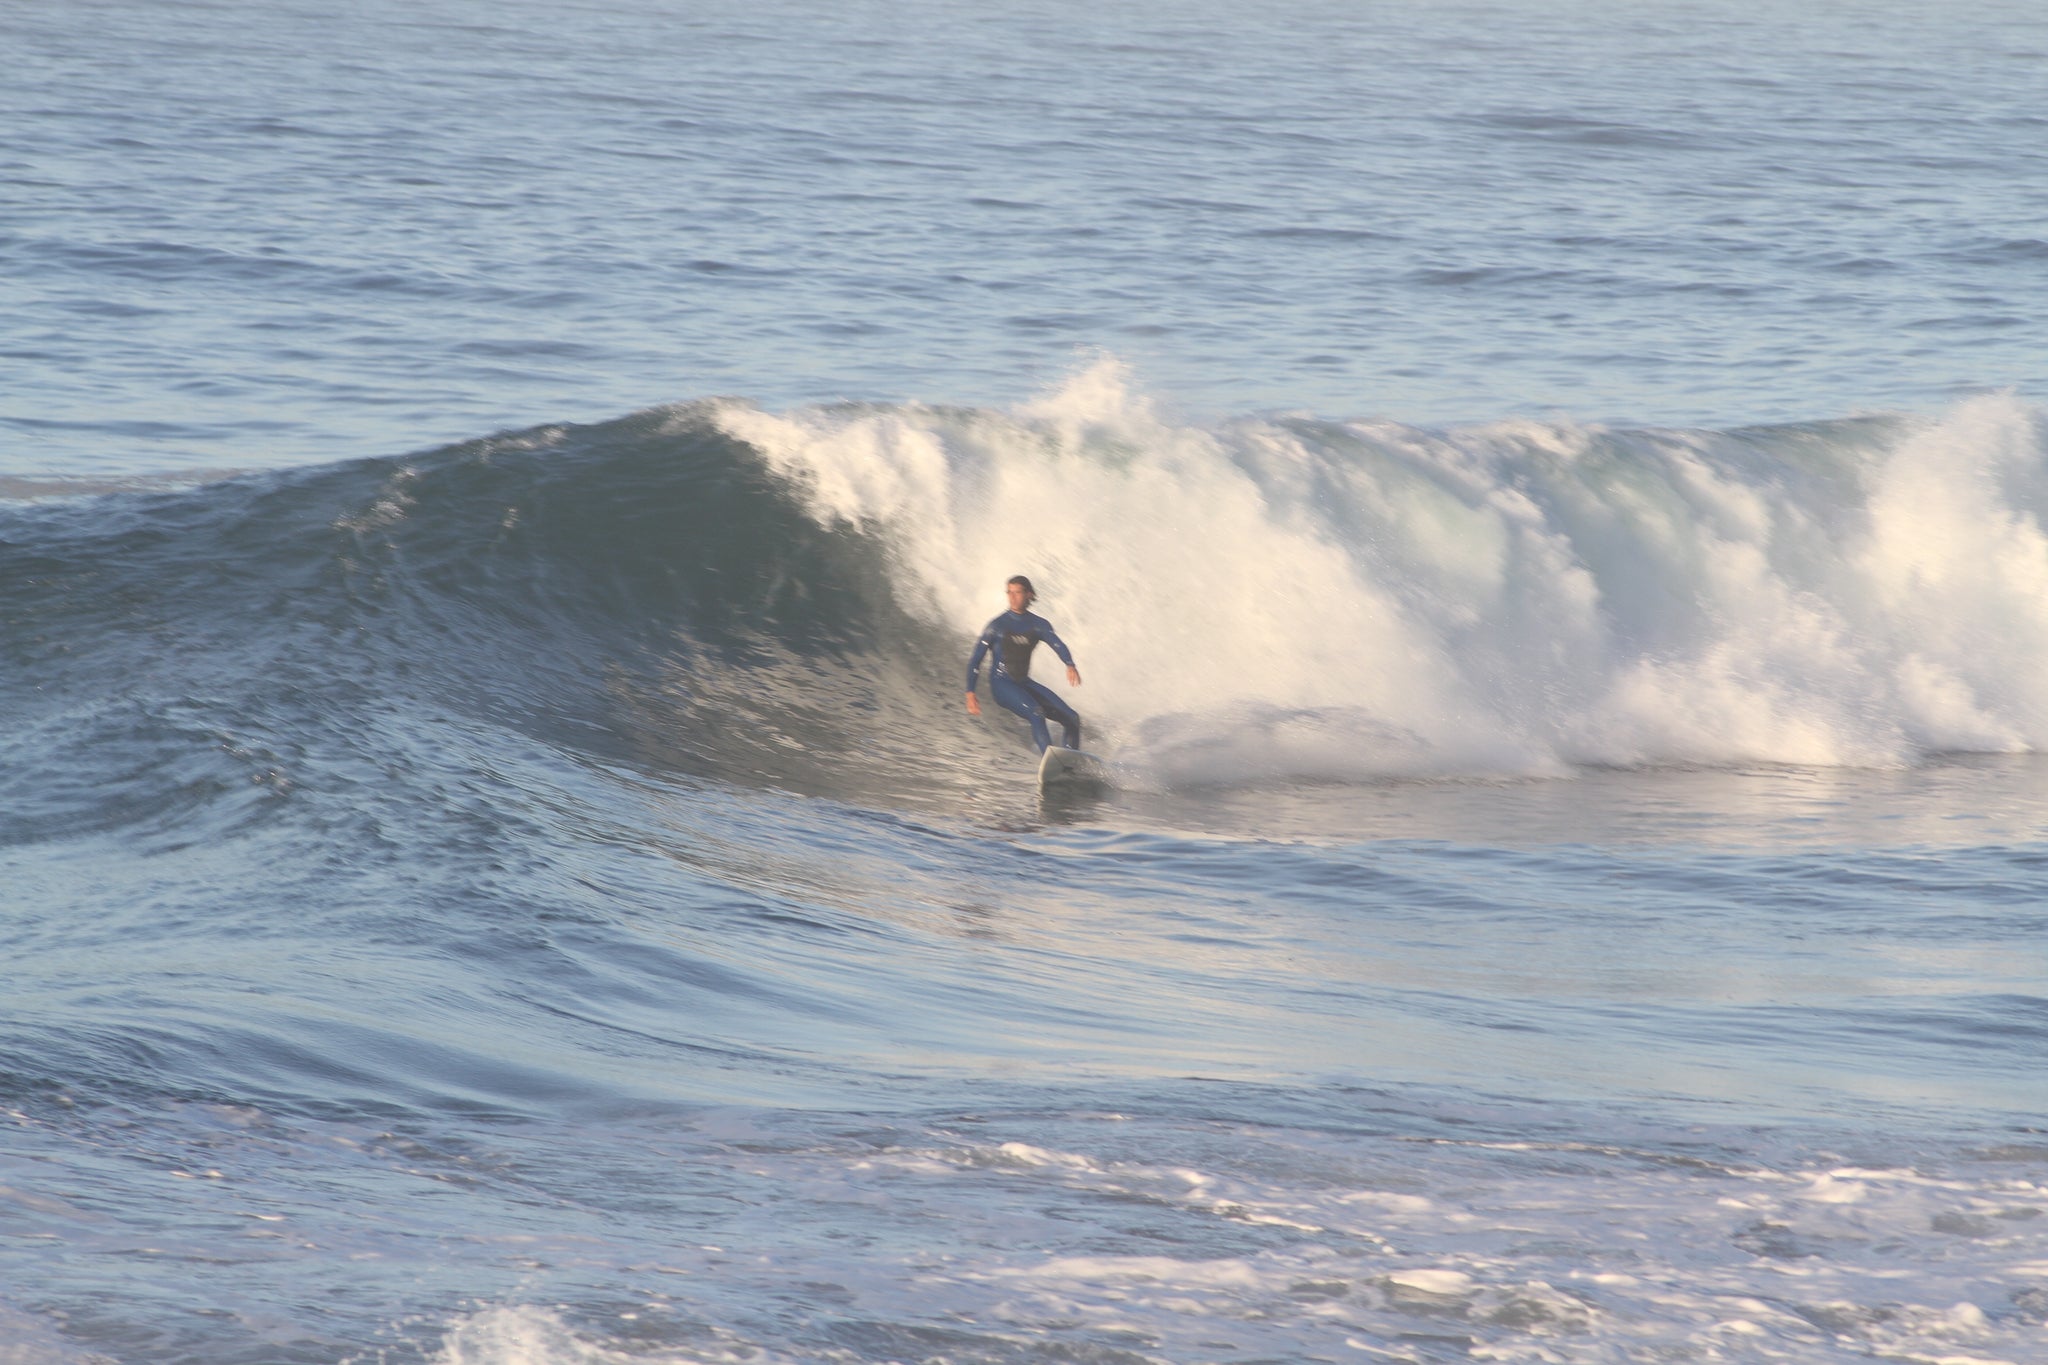 Surfer at the Wedge